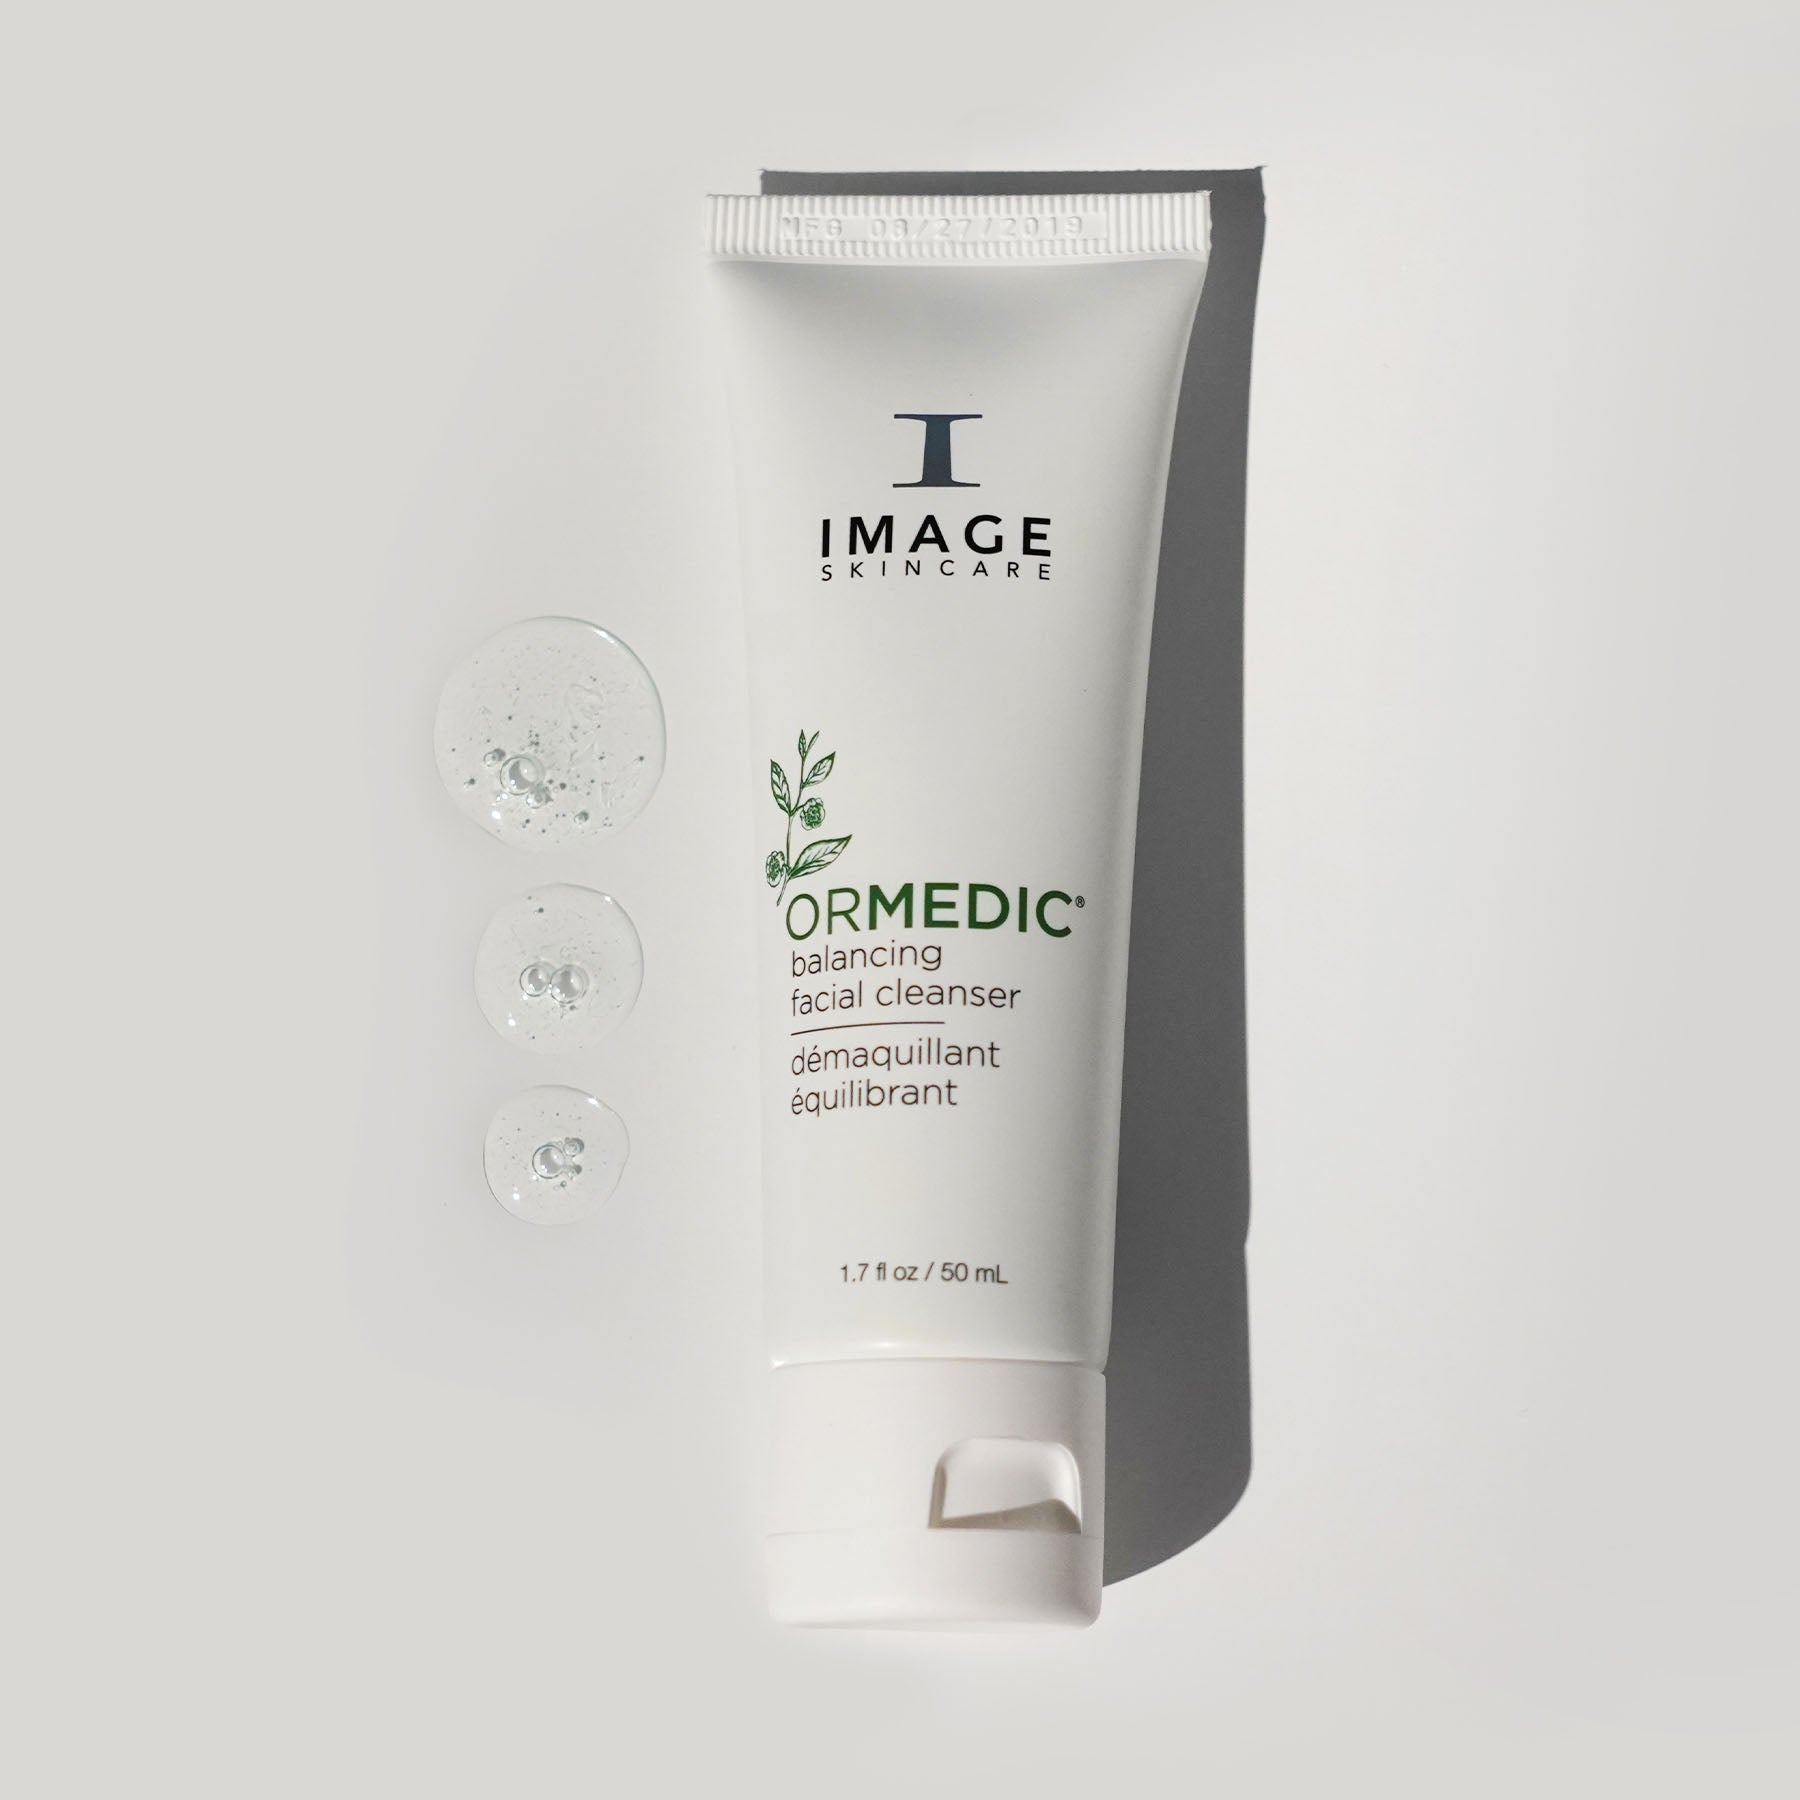 Discovery-size ORMEDIC® balancing facial cleanser